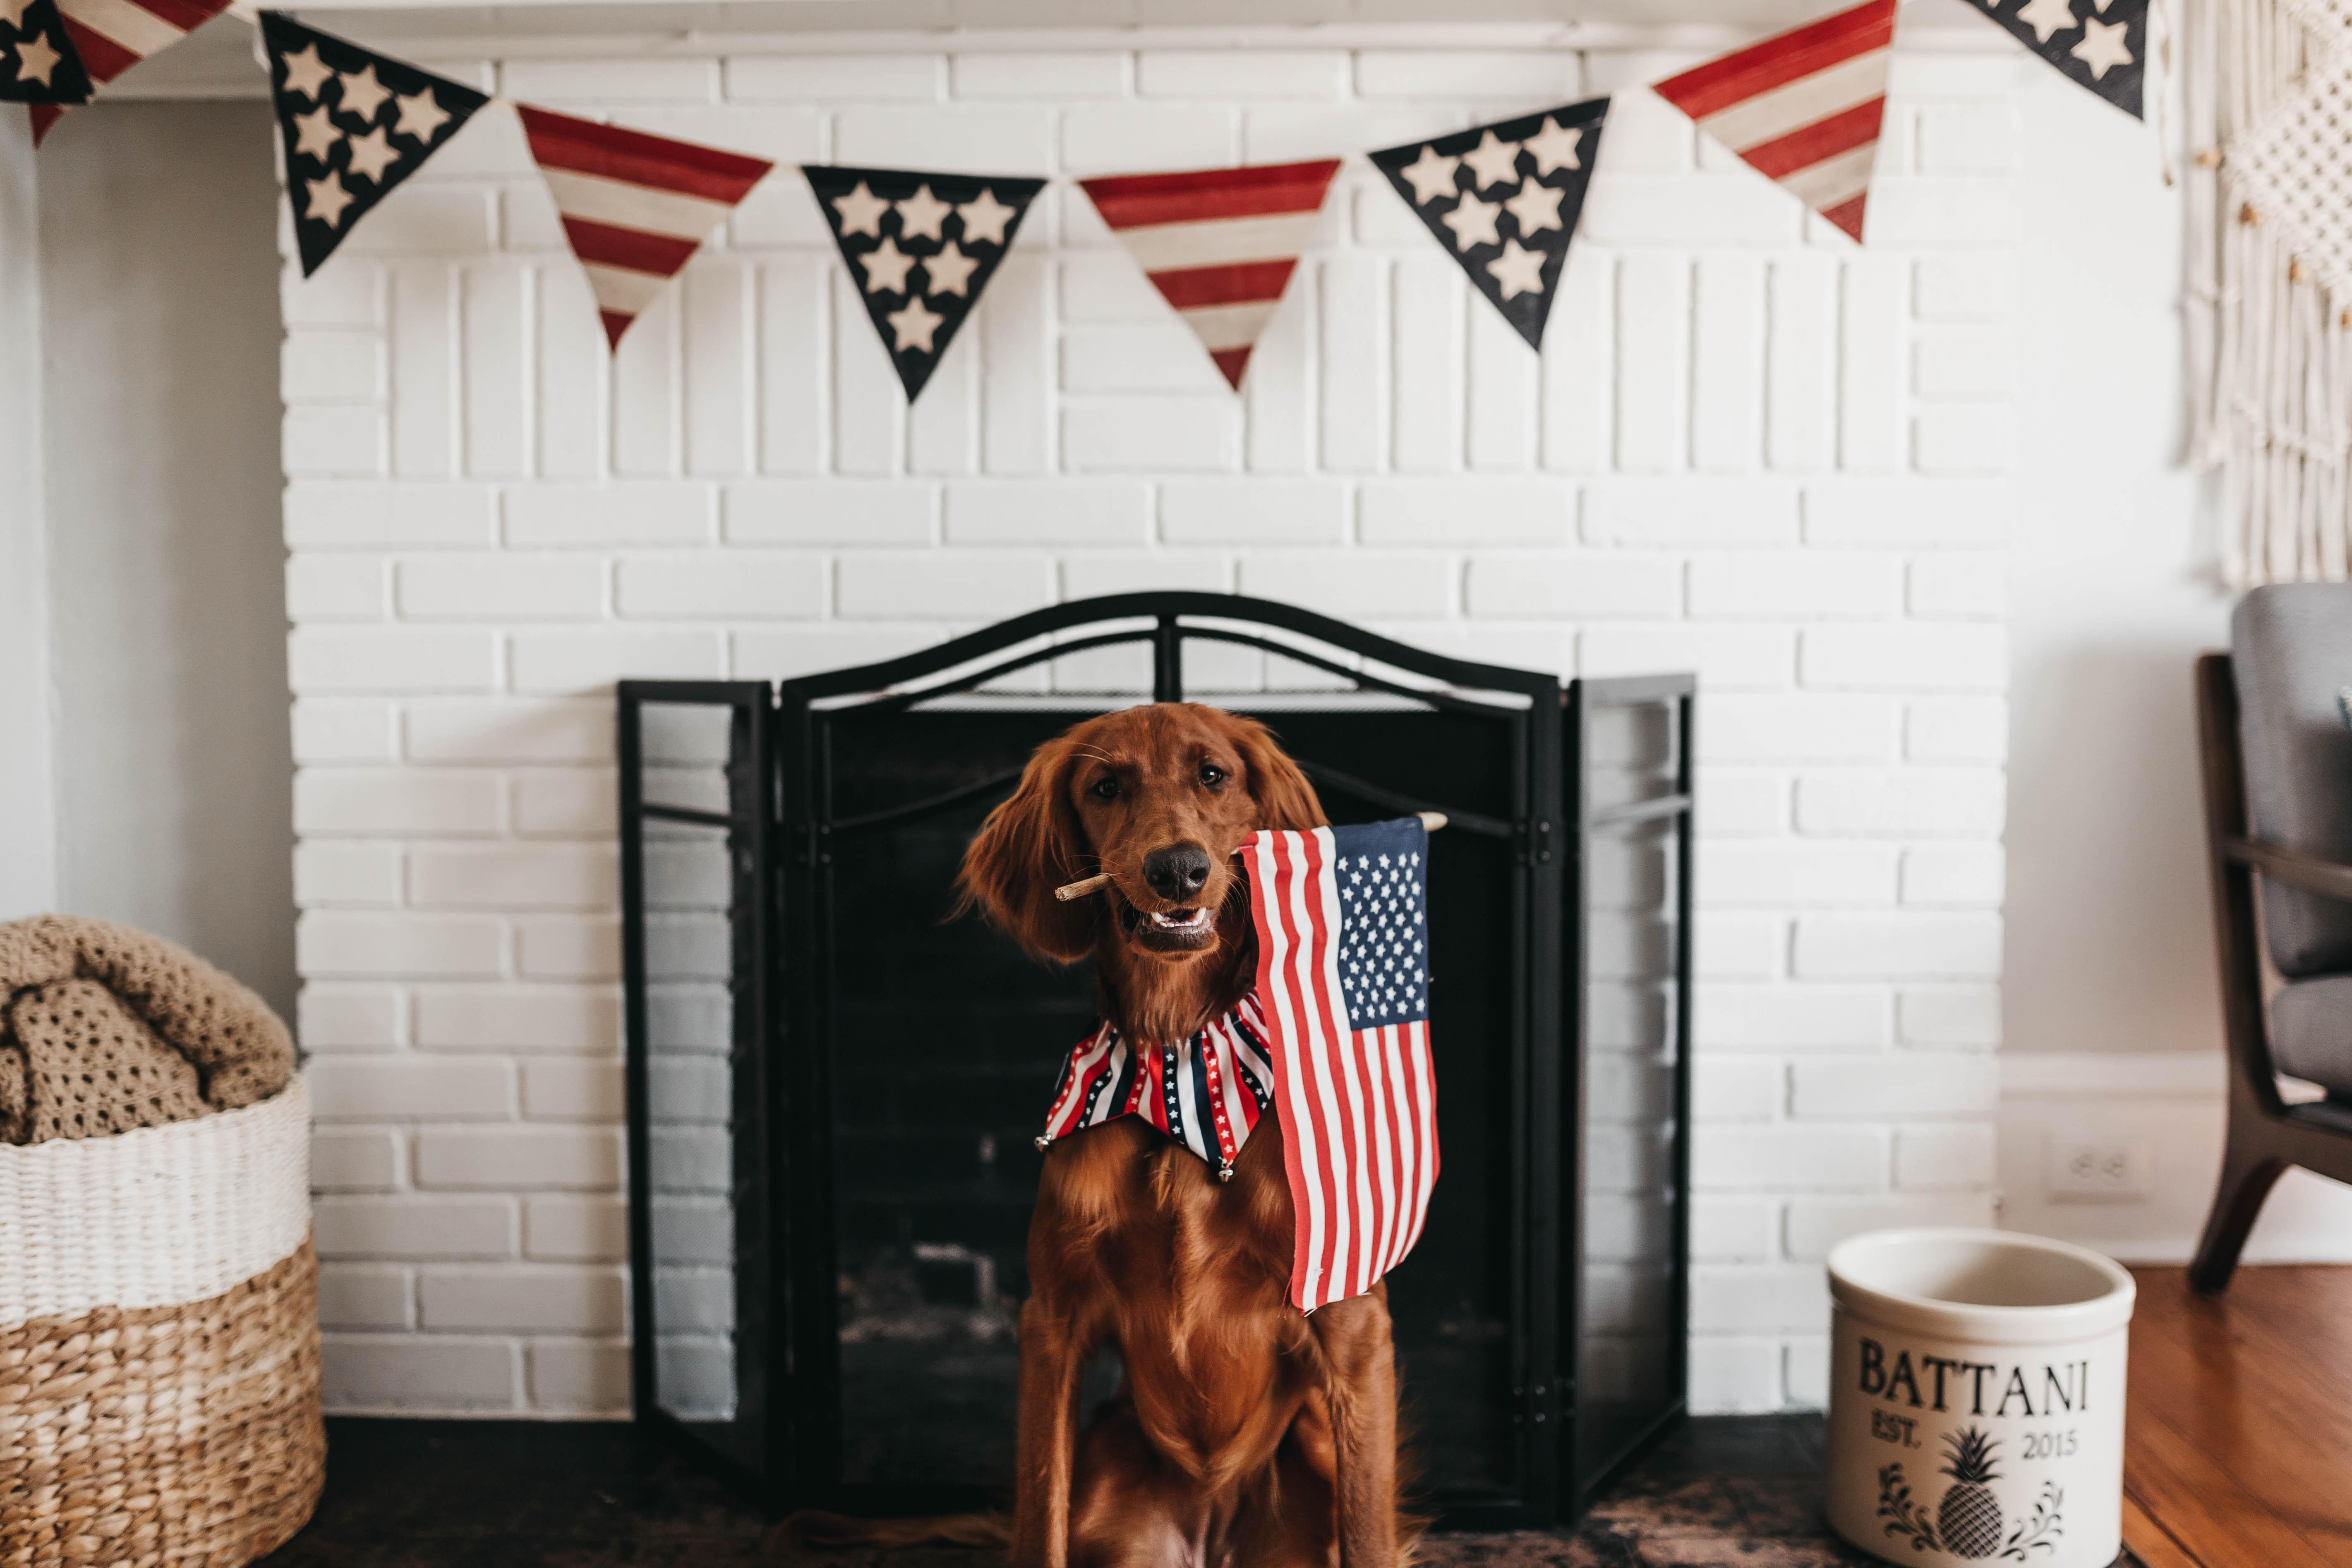 A brown, long-haired dog holding an American flag in its mouth in front of a fireplace decorated with stars and stripes